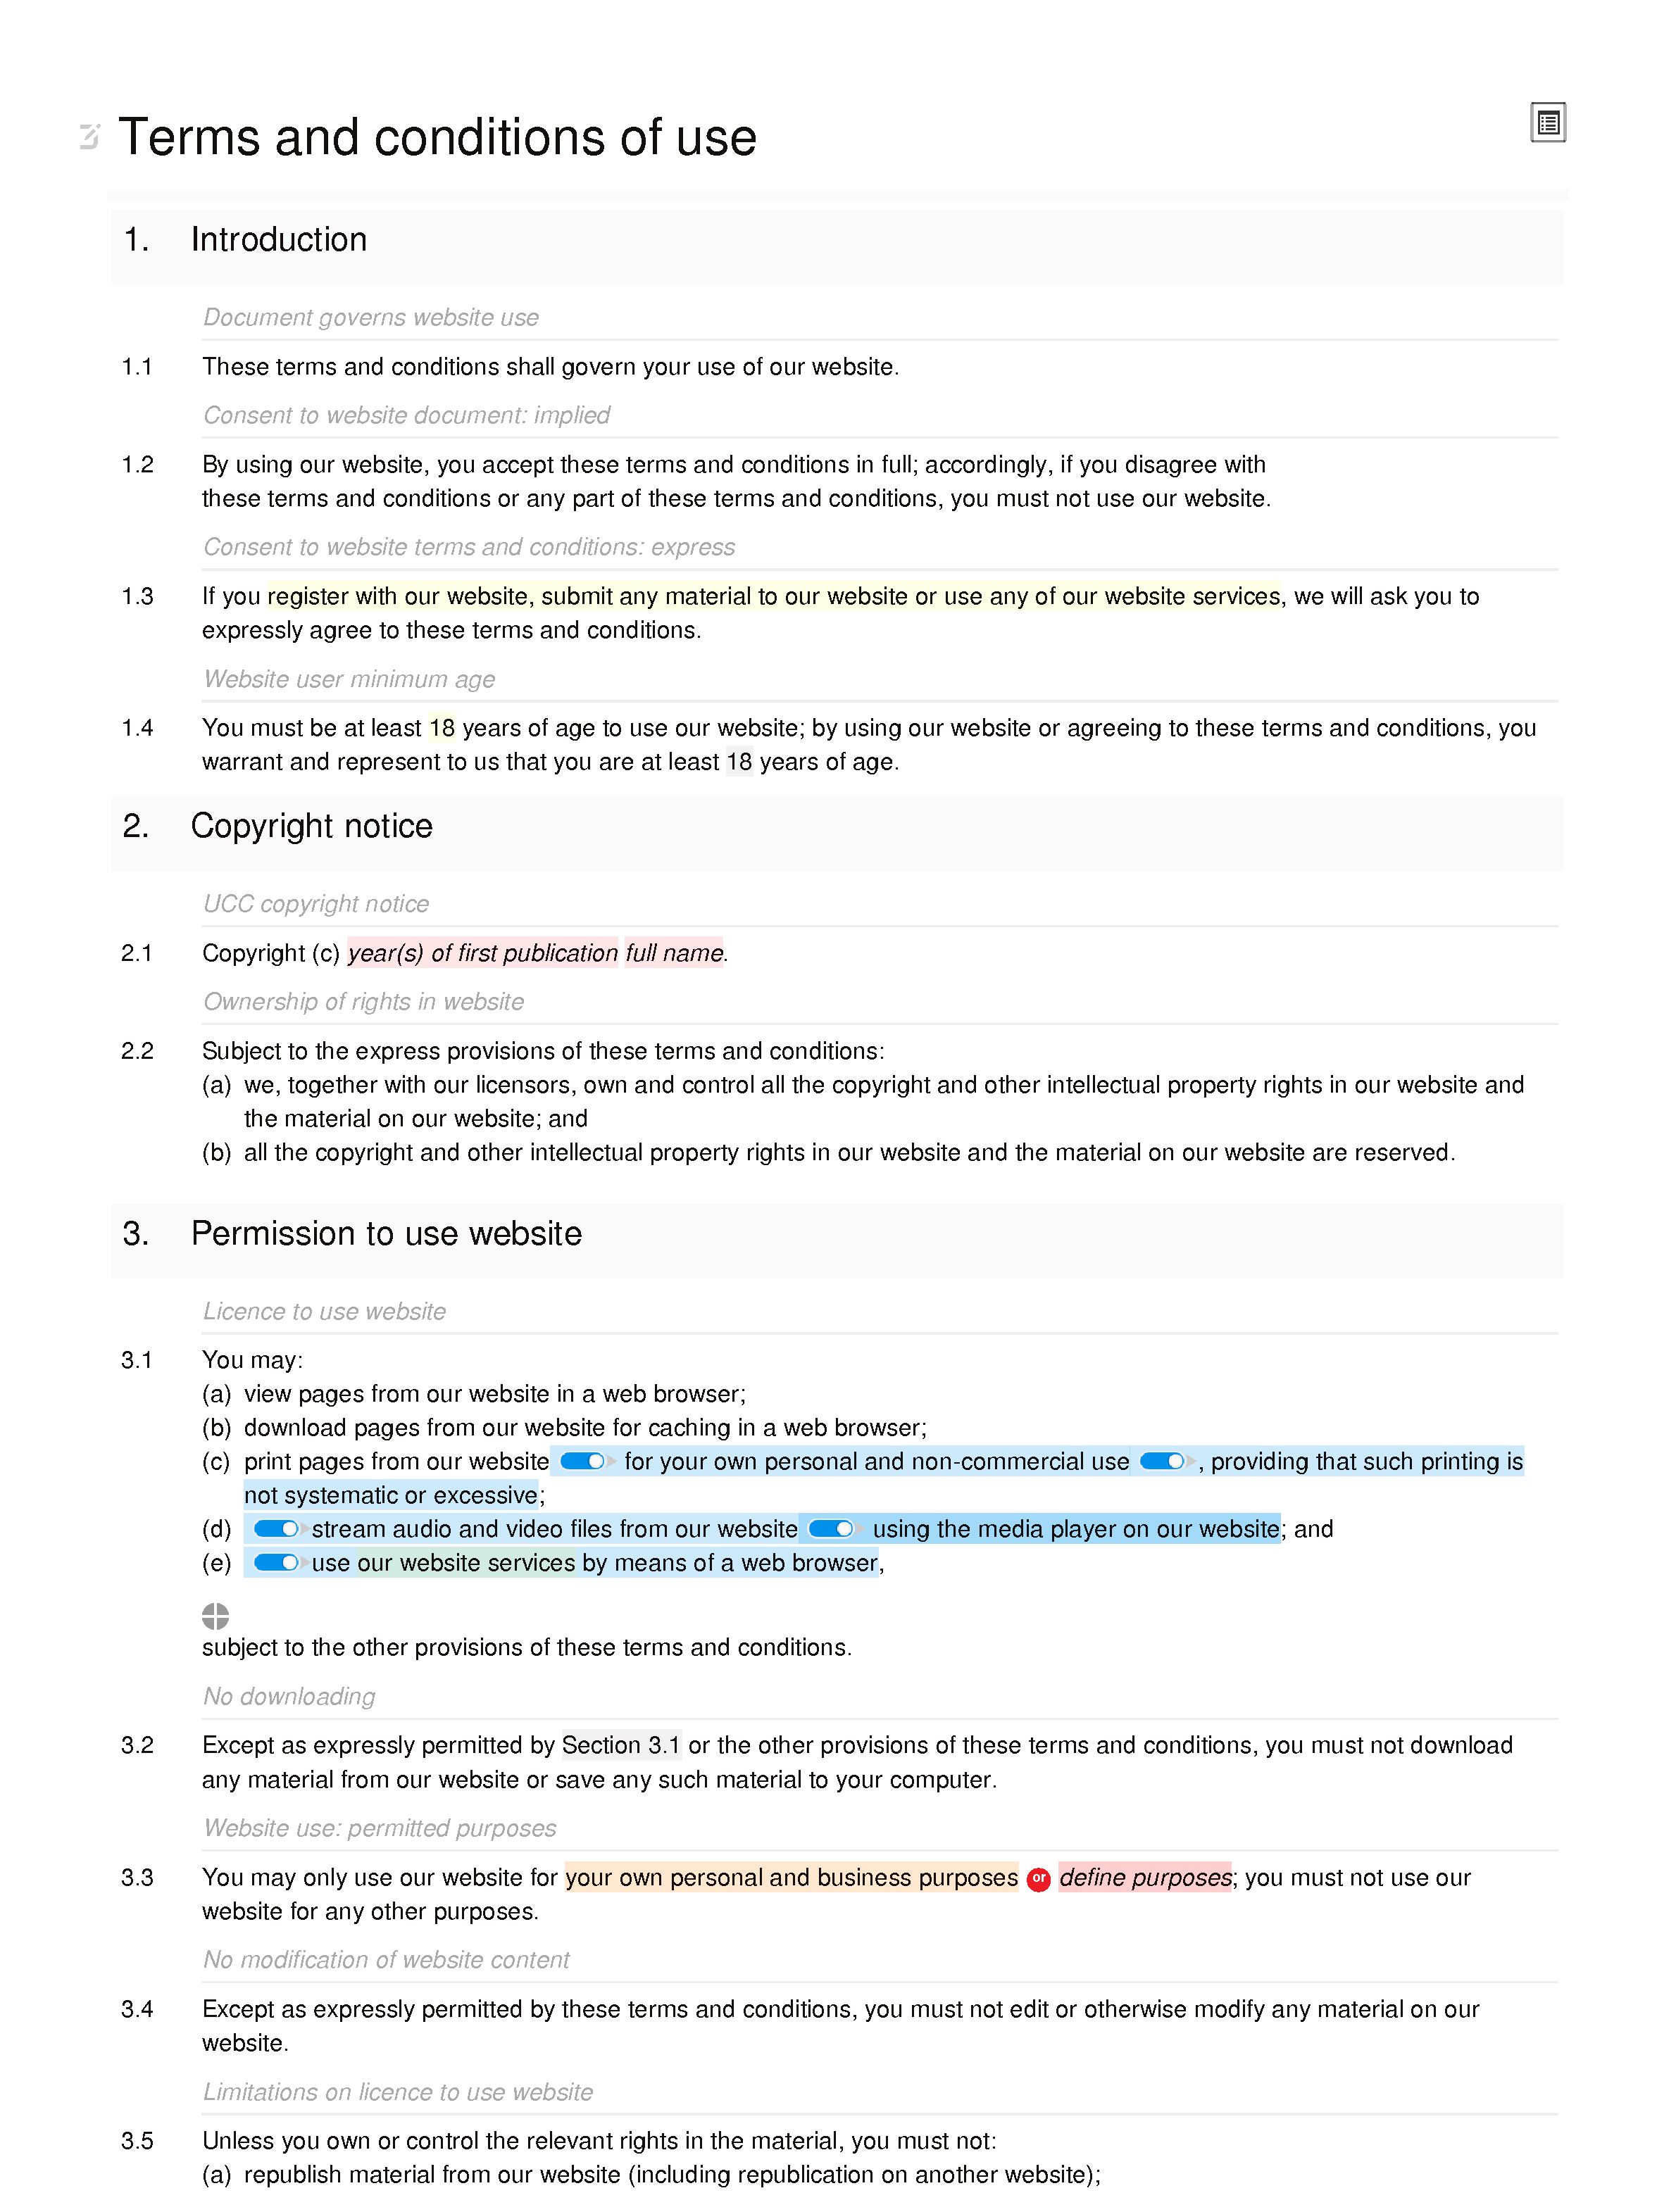 Website terms and conditions (standard) document editor preview